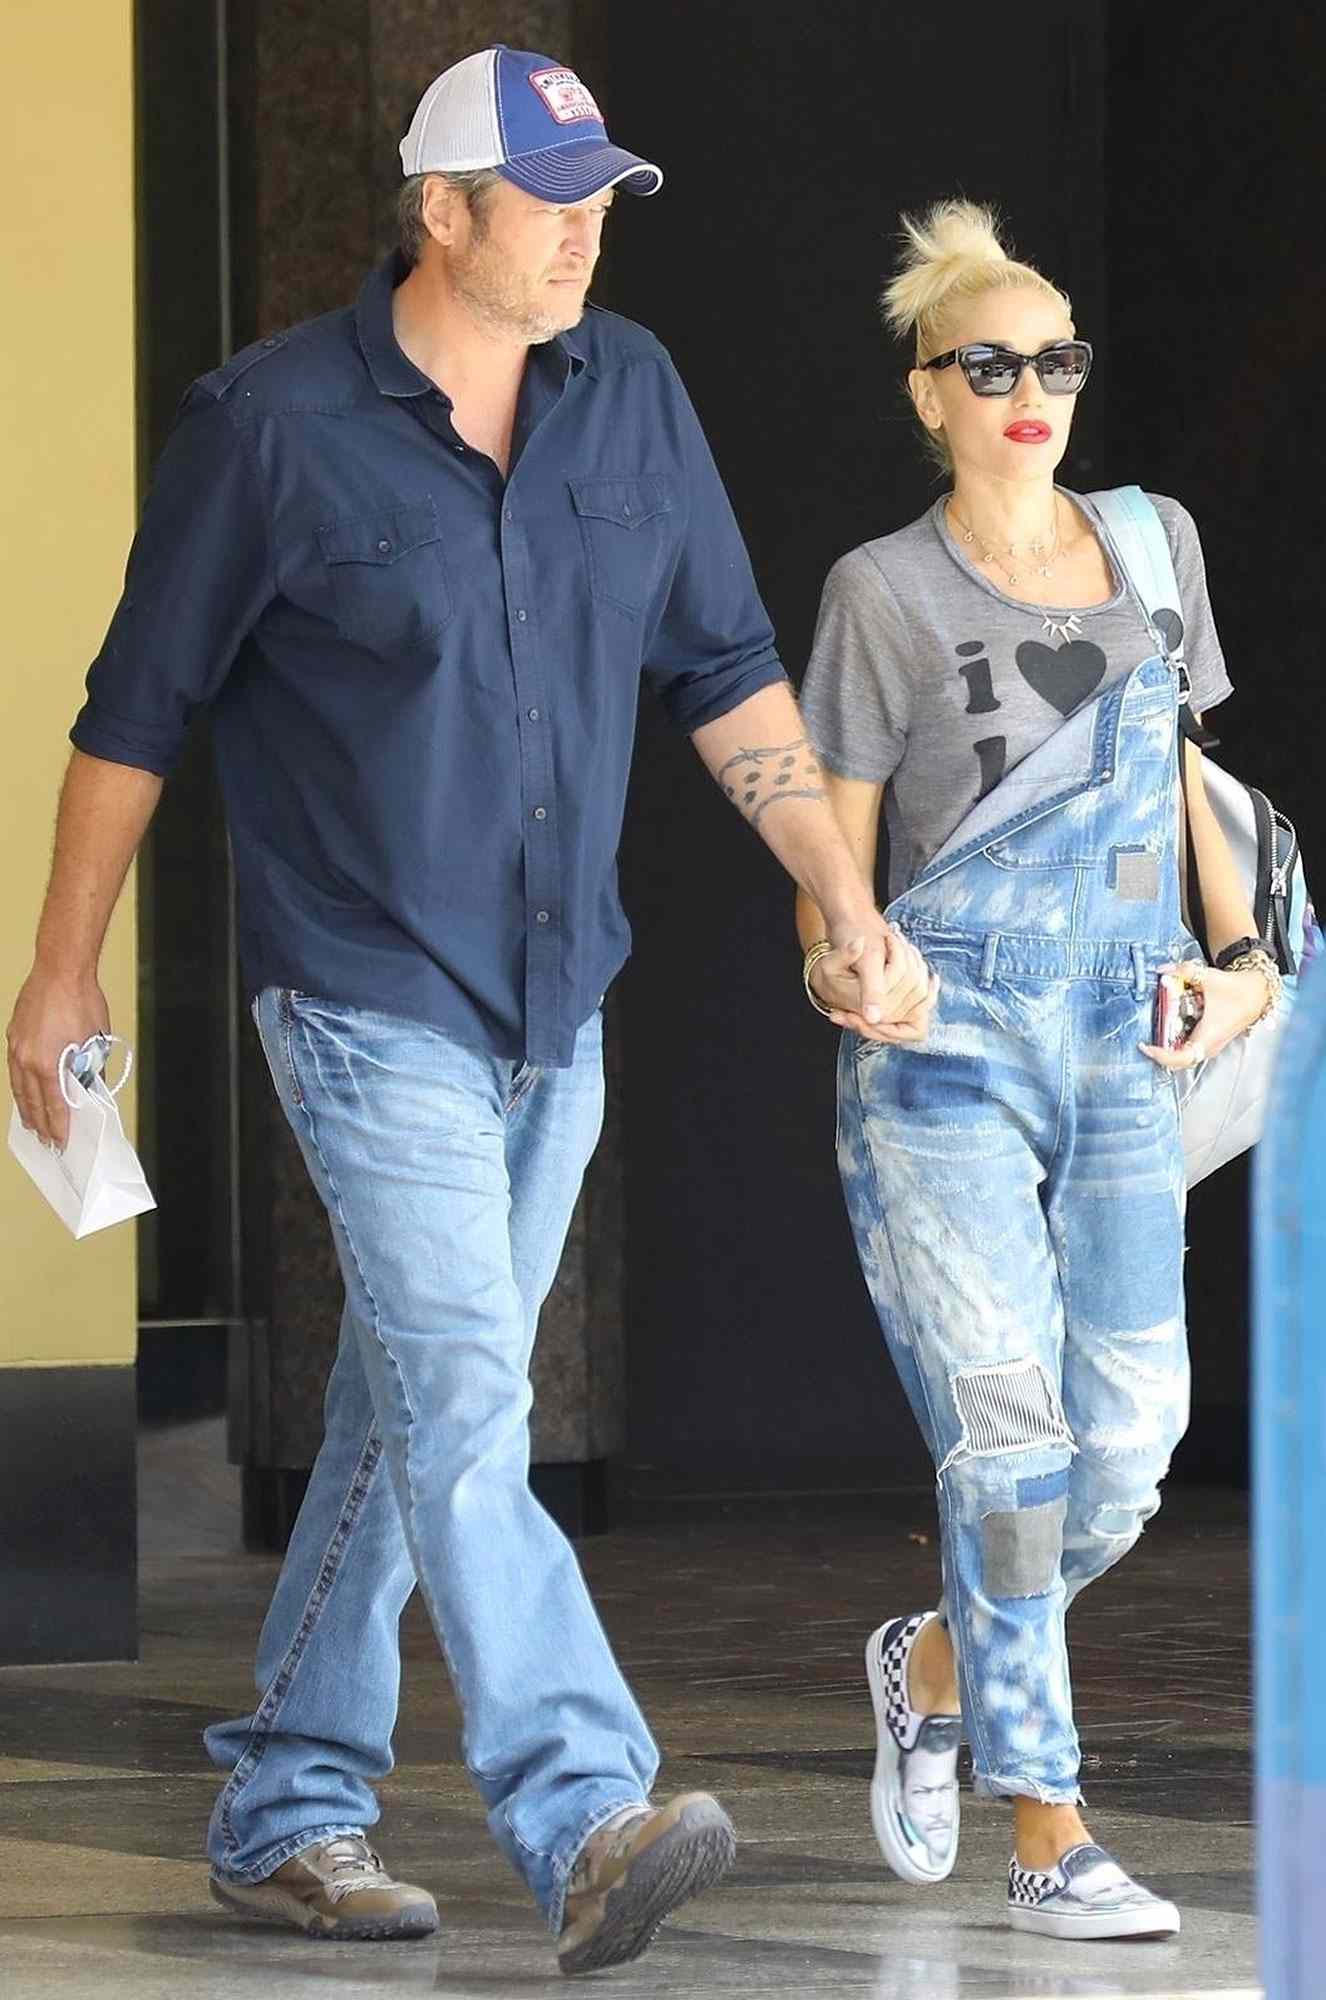 *EXCLUSIVE* Gwen Stefani and her man Blake Shelton hold hands after a doctor's appointment